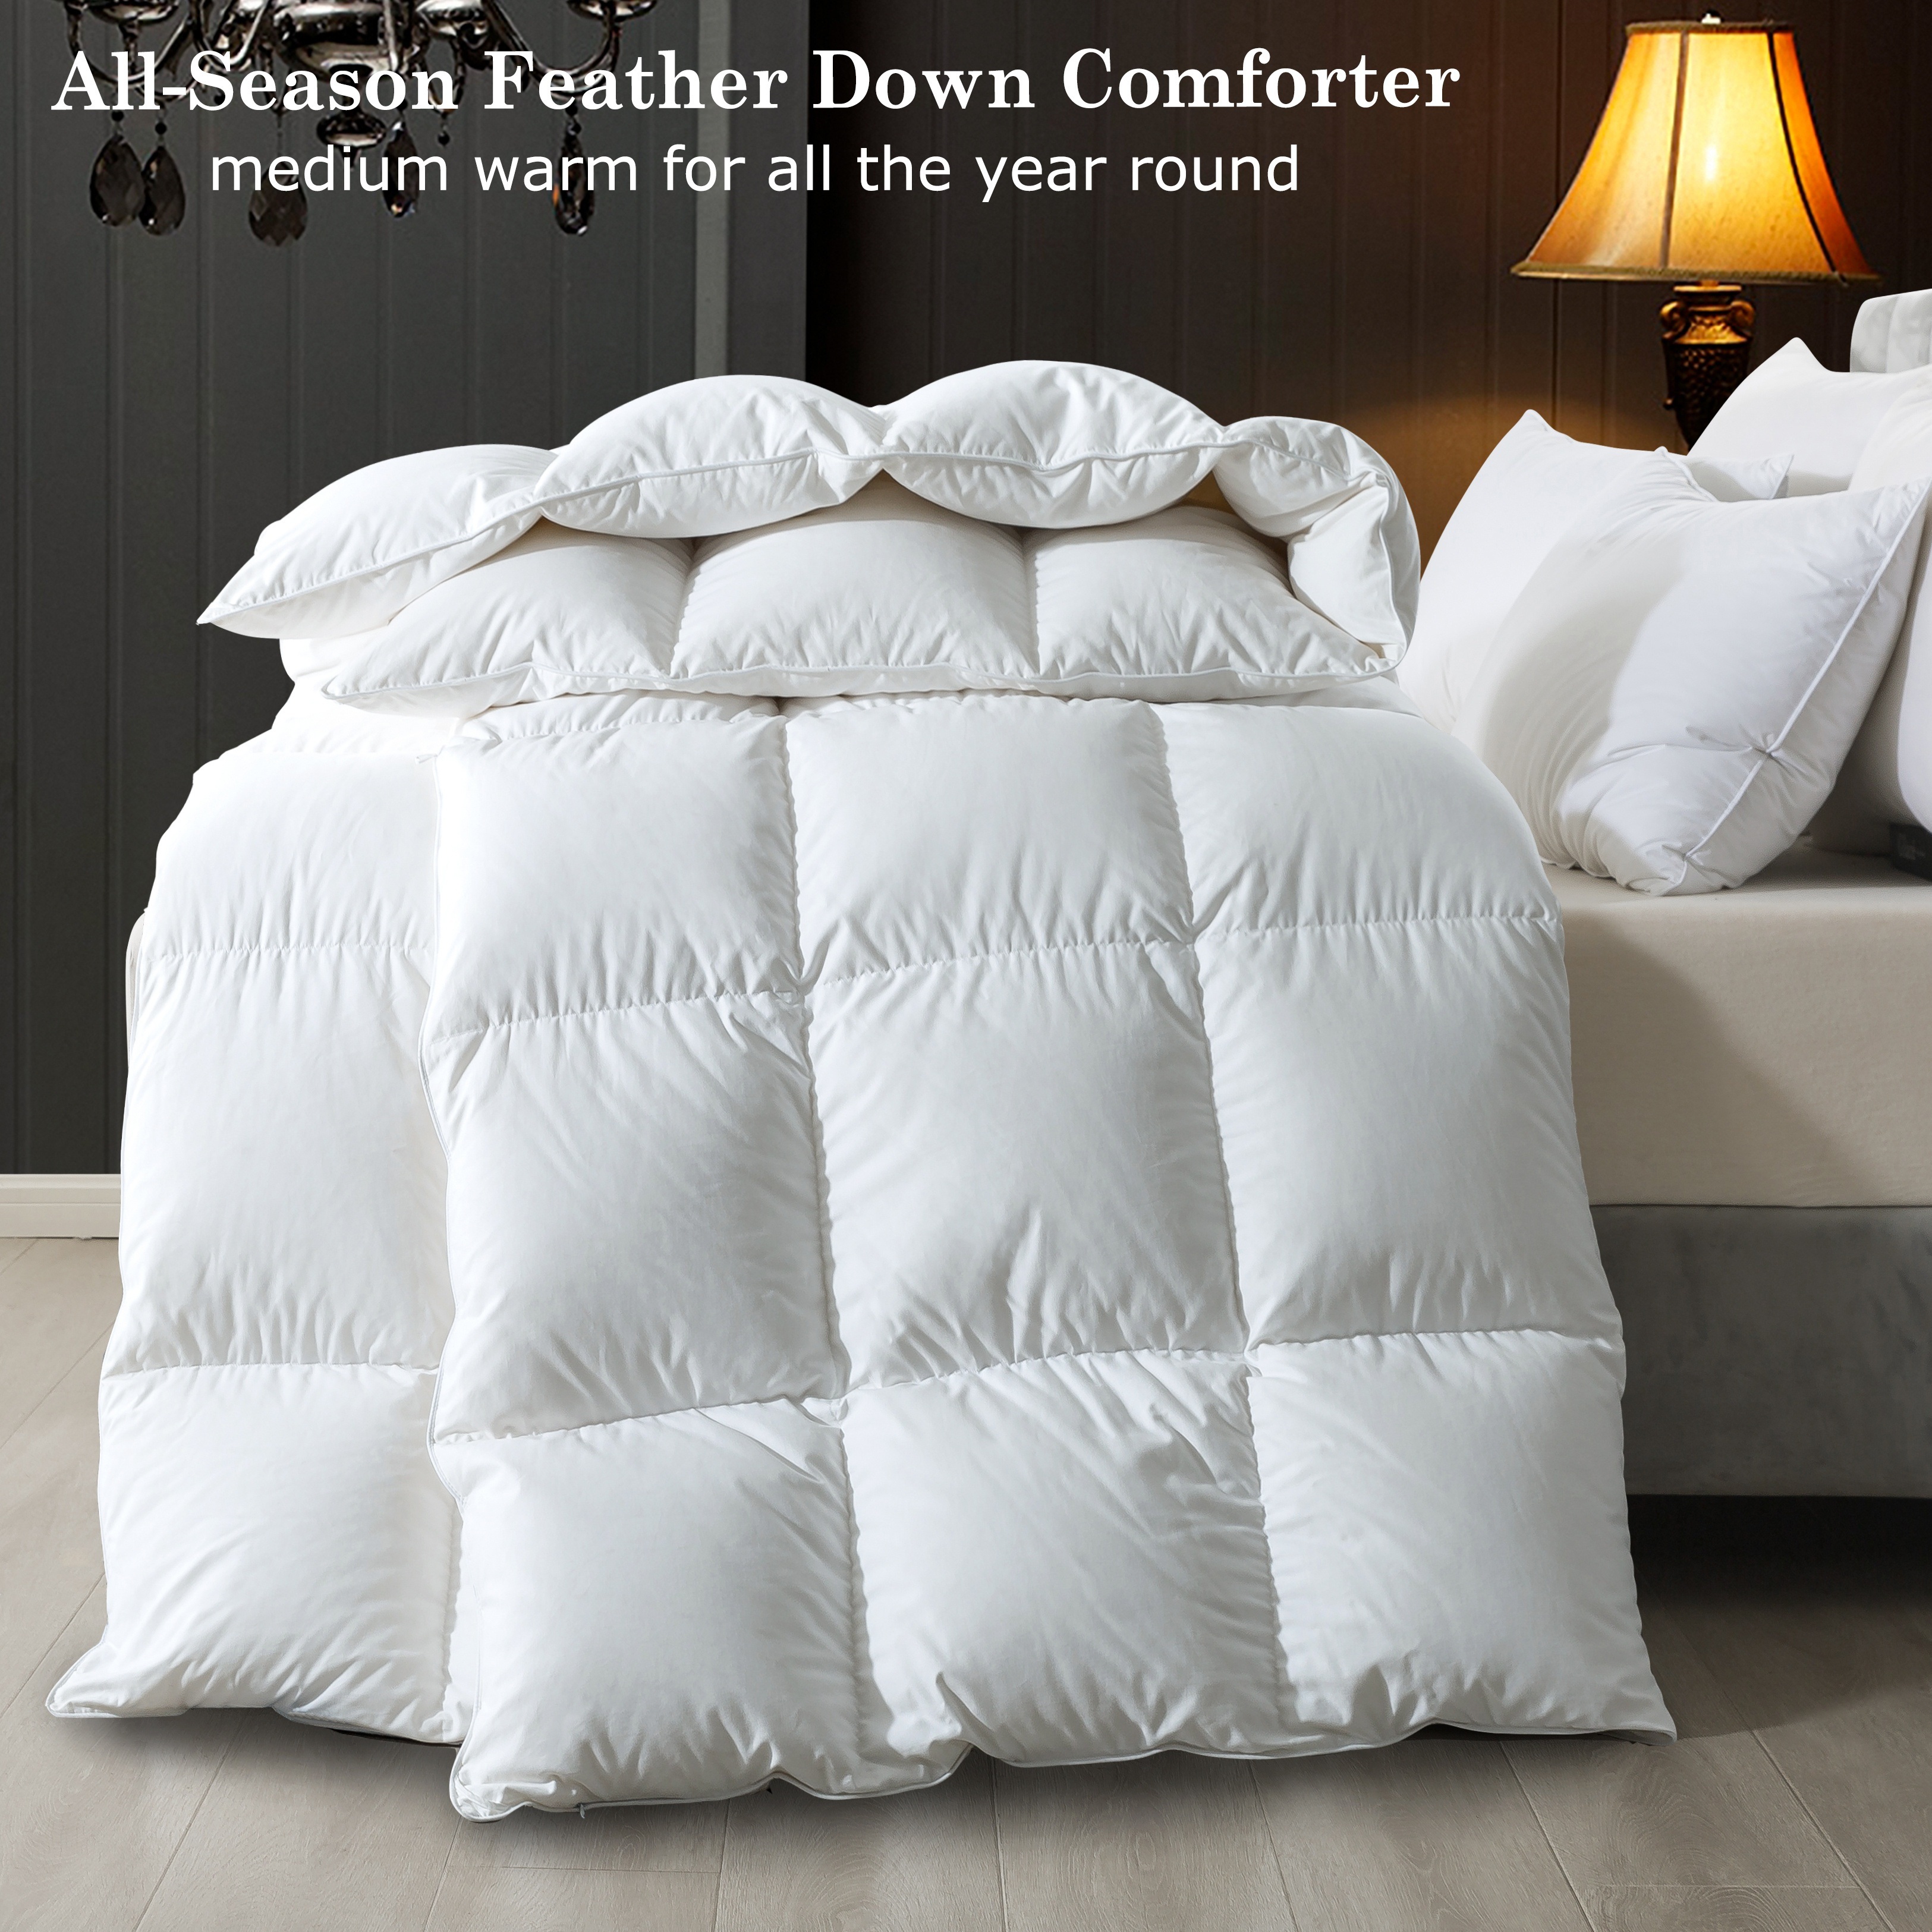 

Elnido Queen® Feather Down Comforter Queen Duvet Insert, All Season White Luxury Hotel Fluffy Bed Comforter, Ultra Soft 100% Cotton Cover, Queen Size 90x90 Inch